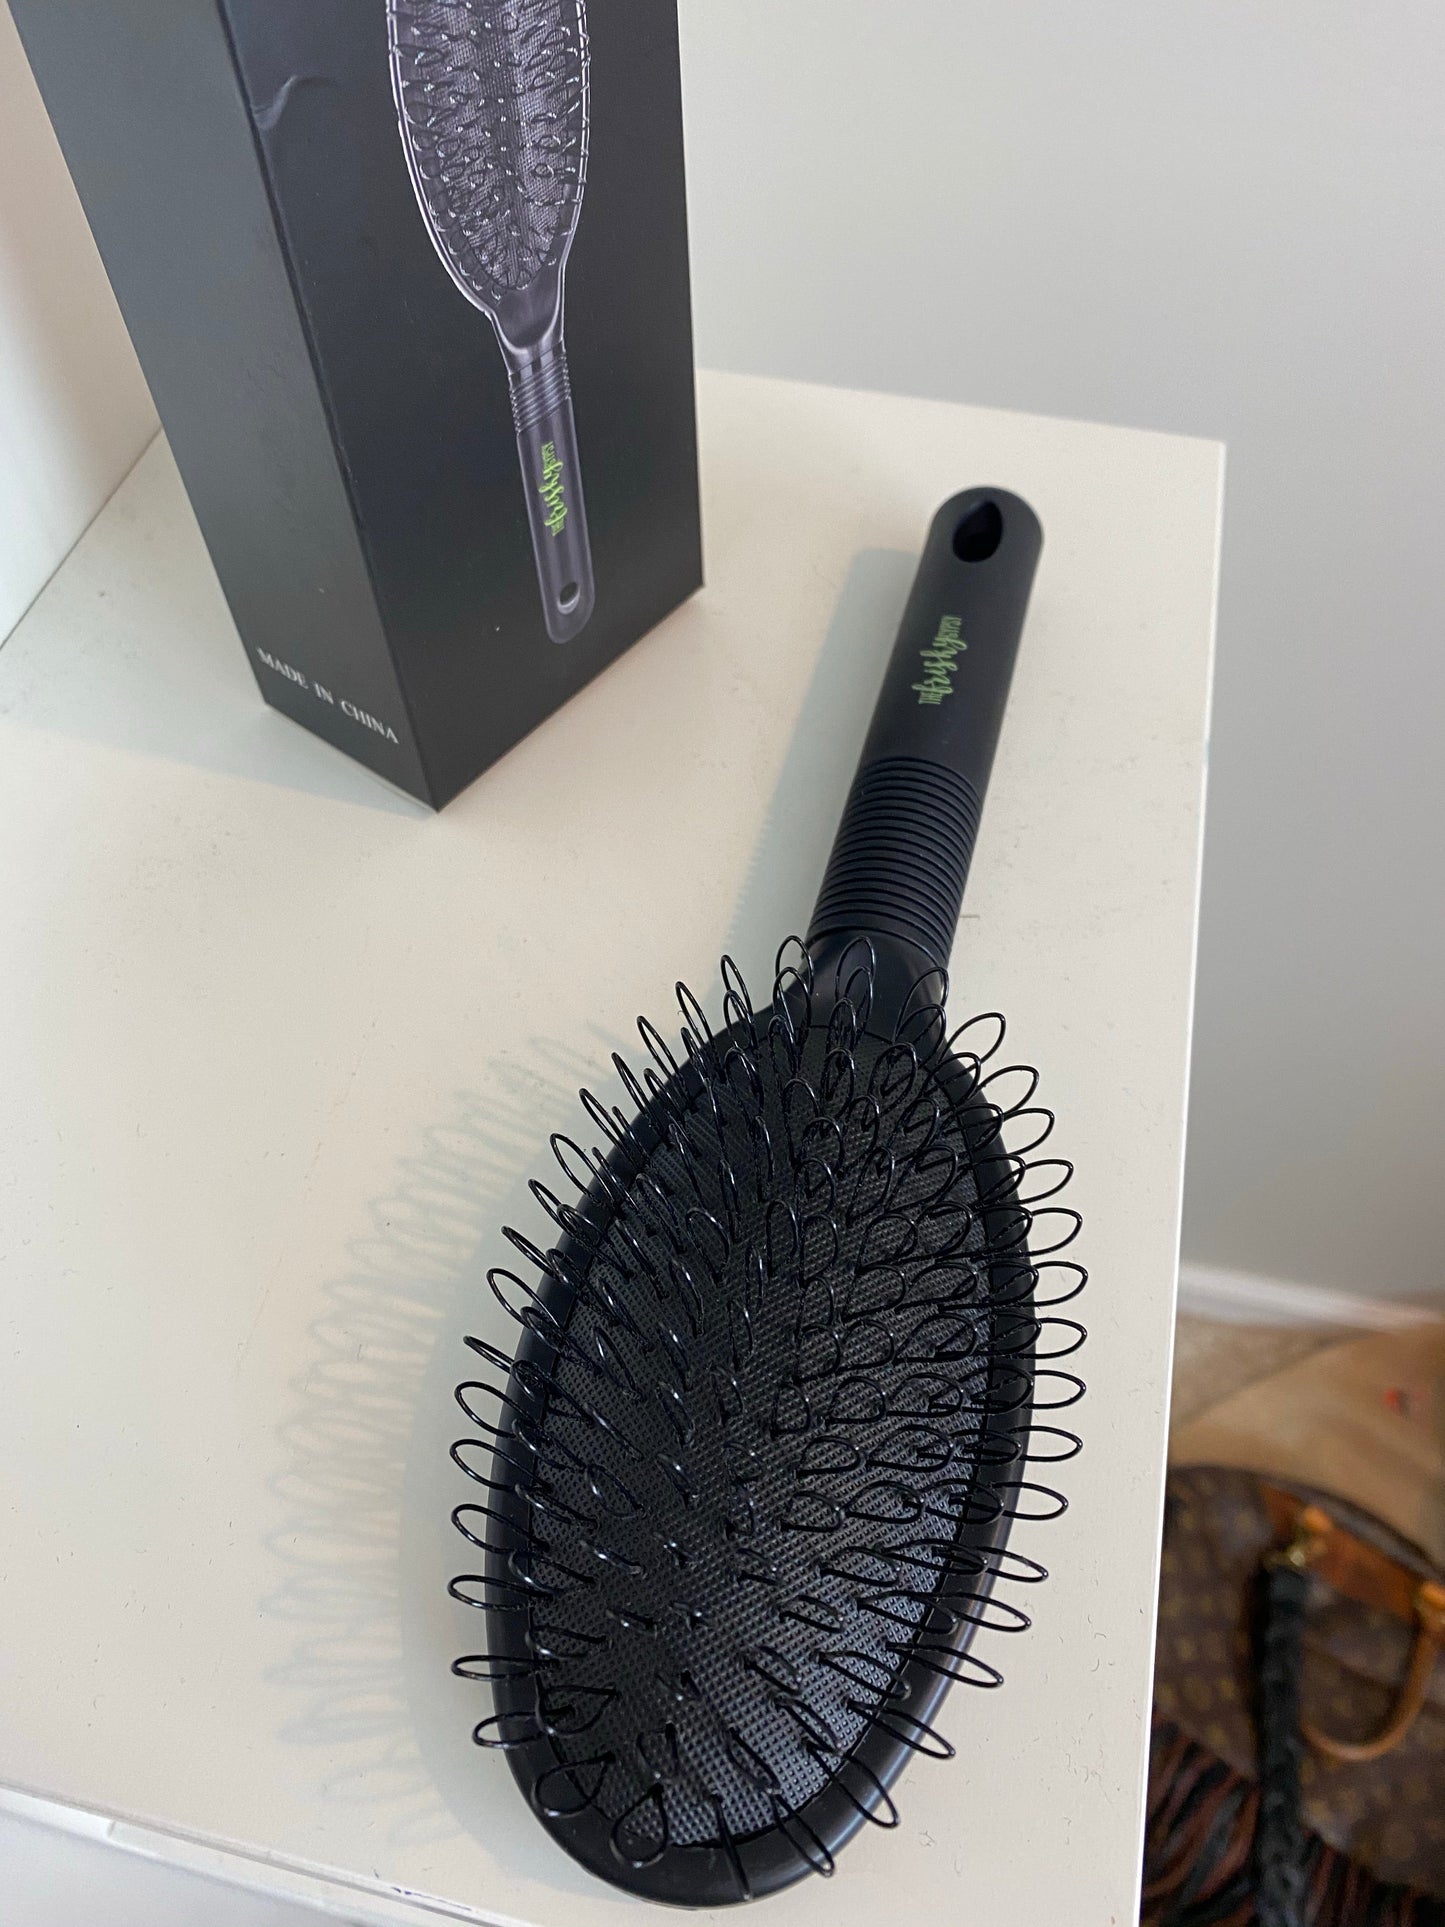 Knot Today Wig Brush